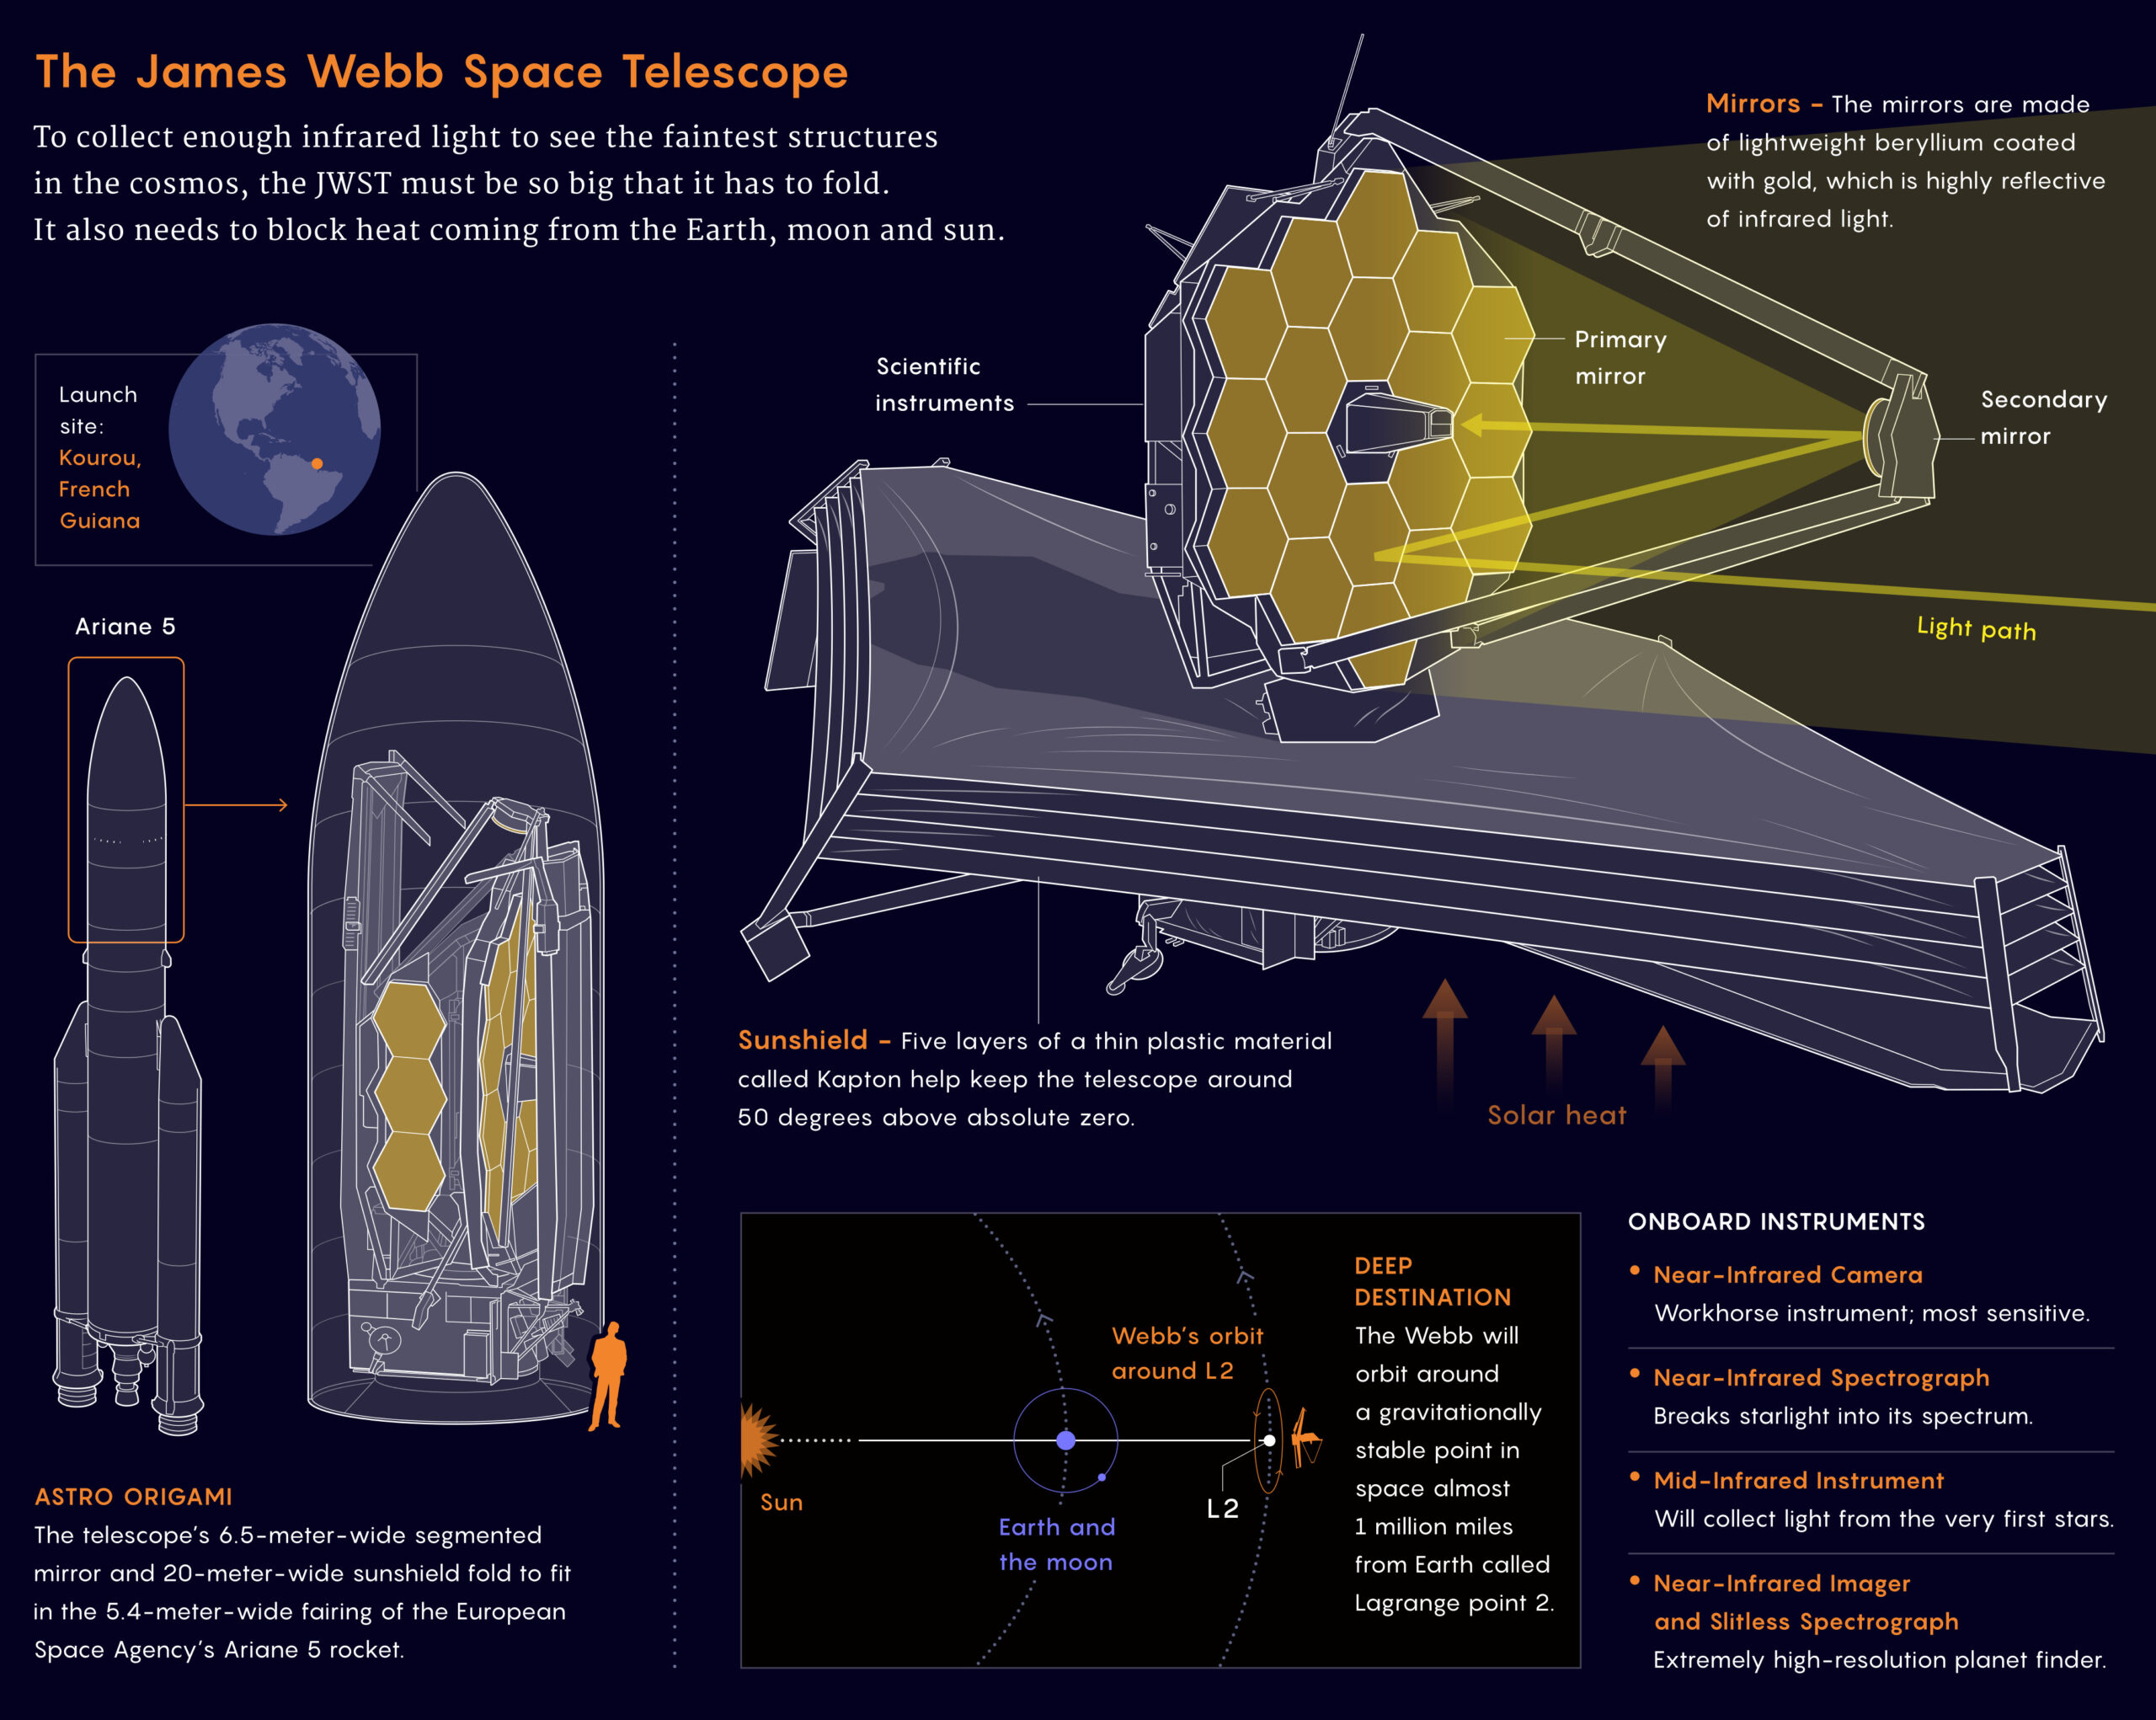 This graphic shows different pieces of the James Webb Space Telescope. To collect enough infrared light to see the faintest structures in the cosmos, the JWST must be so big that it has to fold. It also needs to block heat coming from the Earth, moon, and sun.